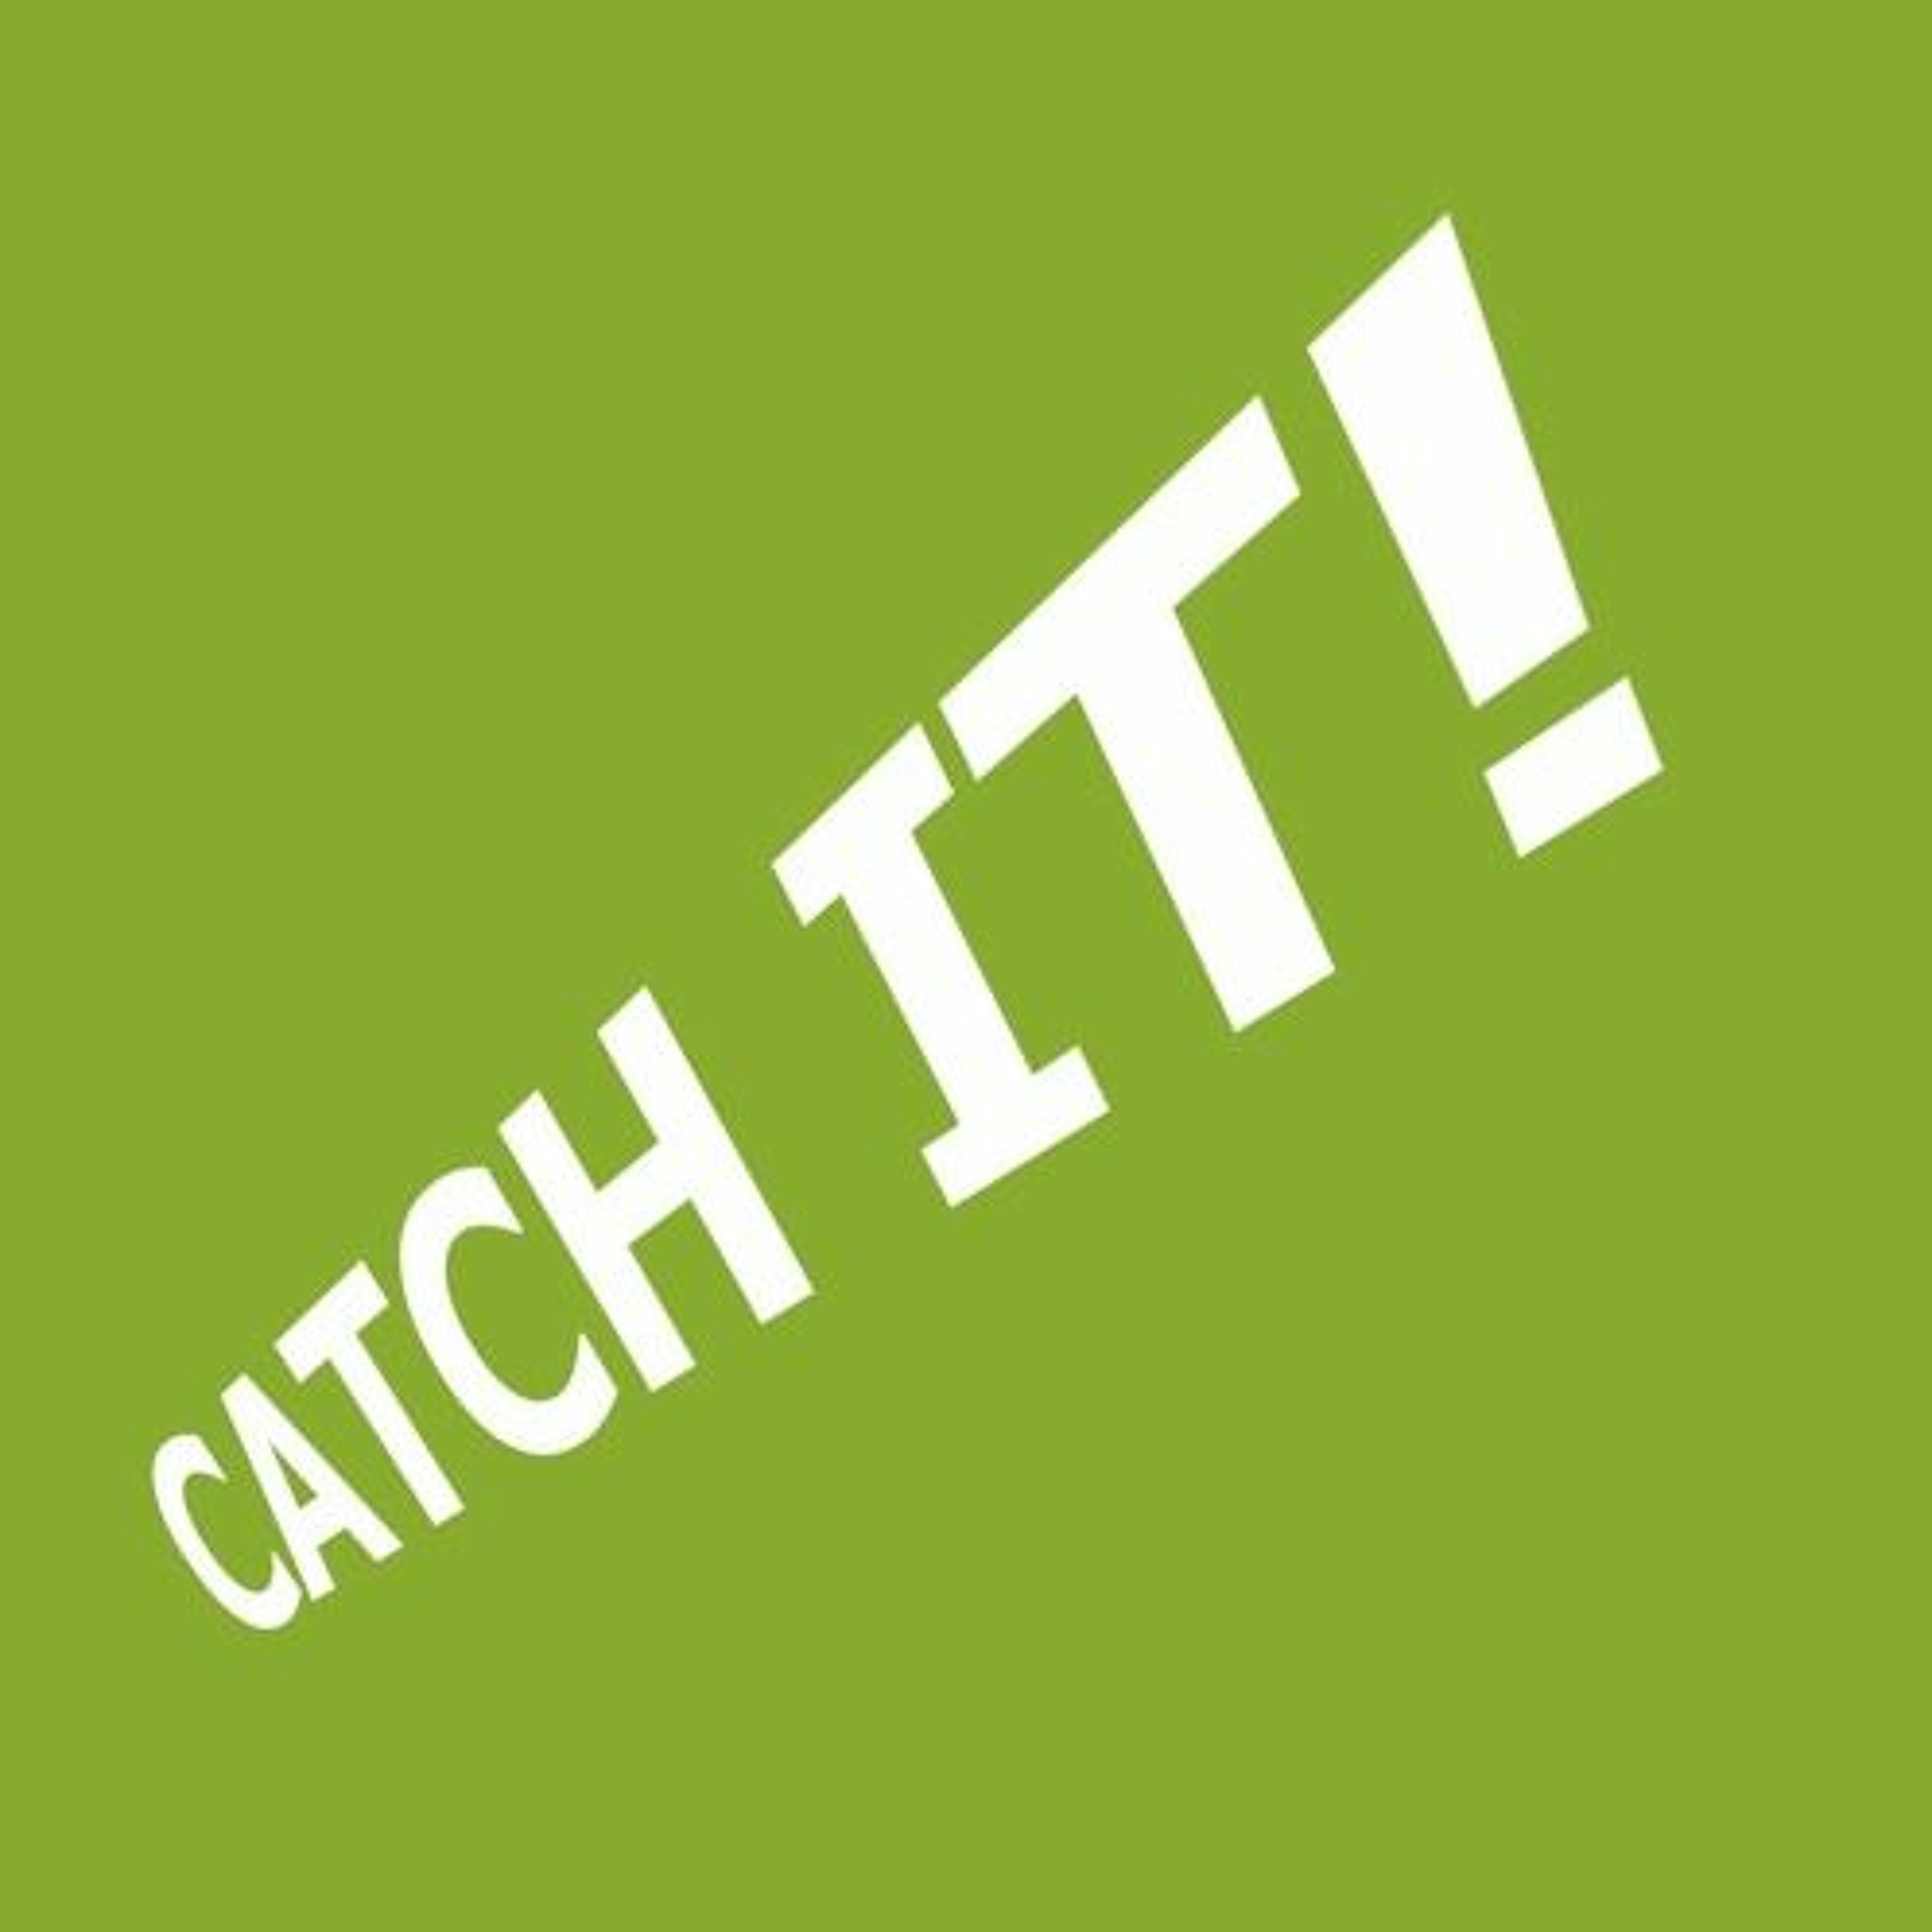 Catch It Episode 5 - We're Back!